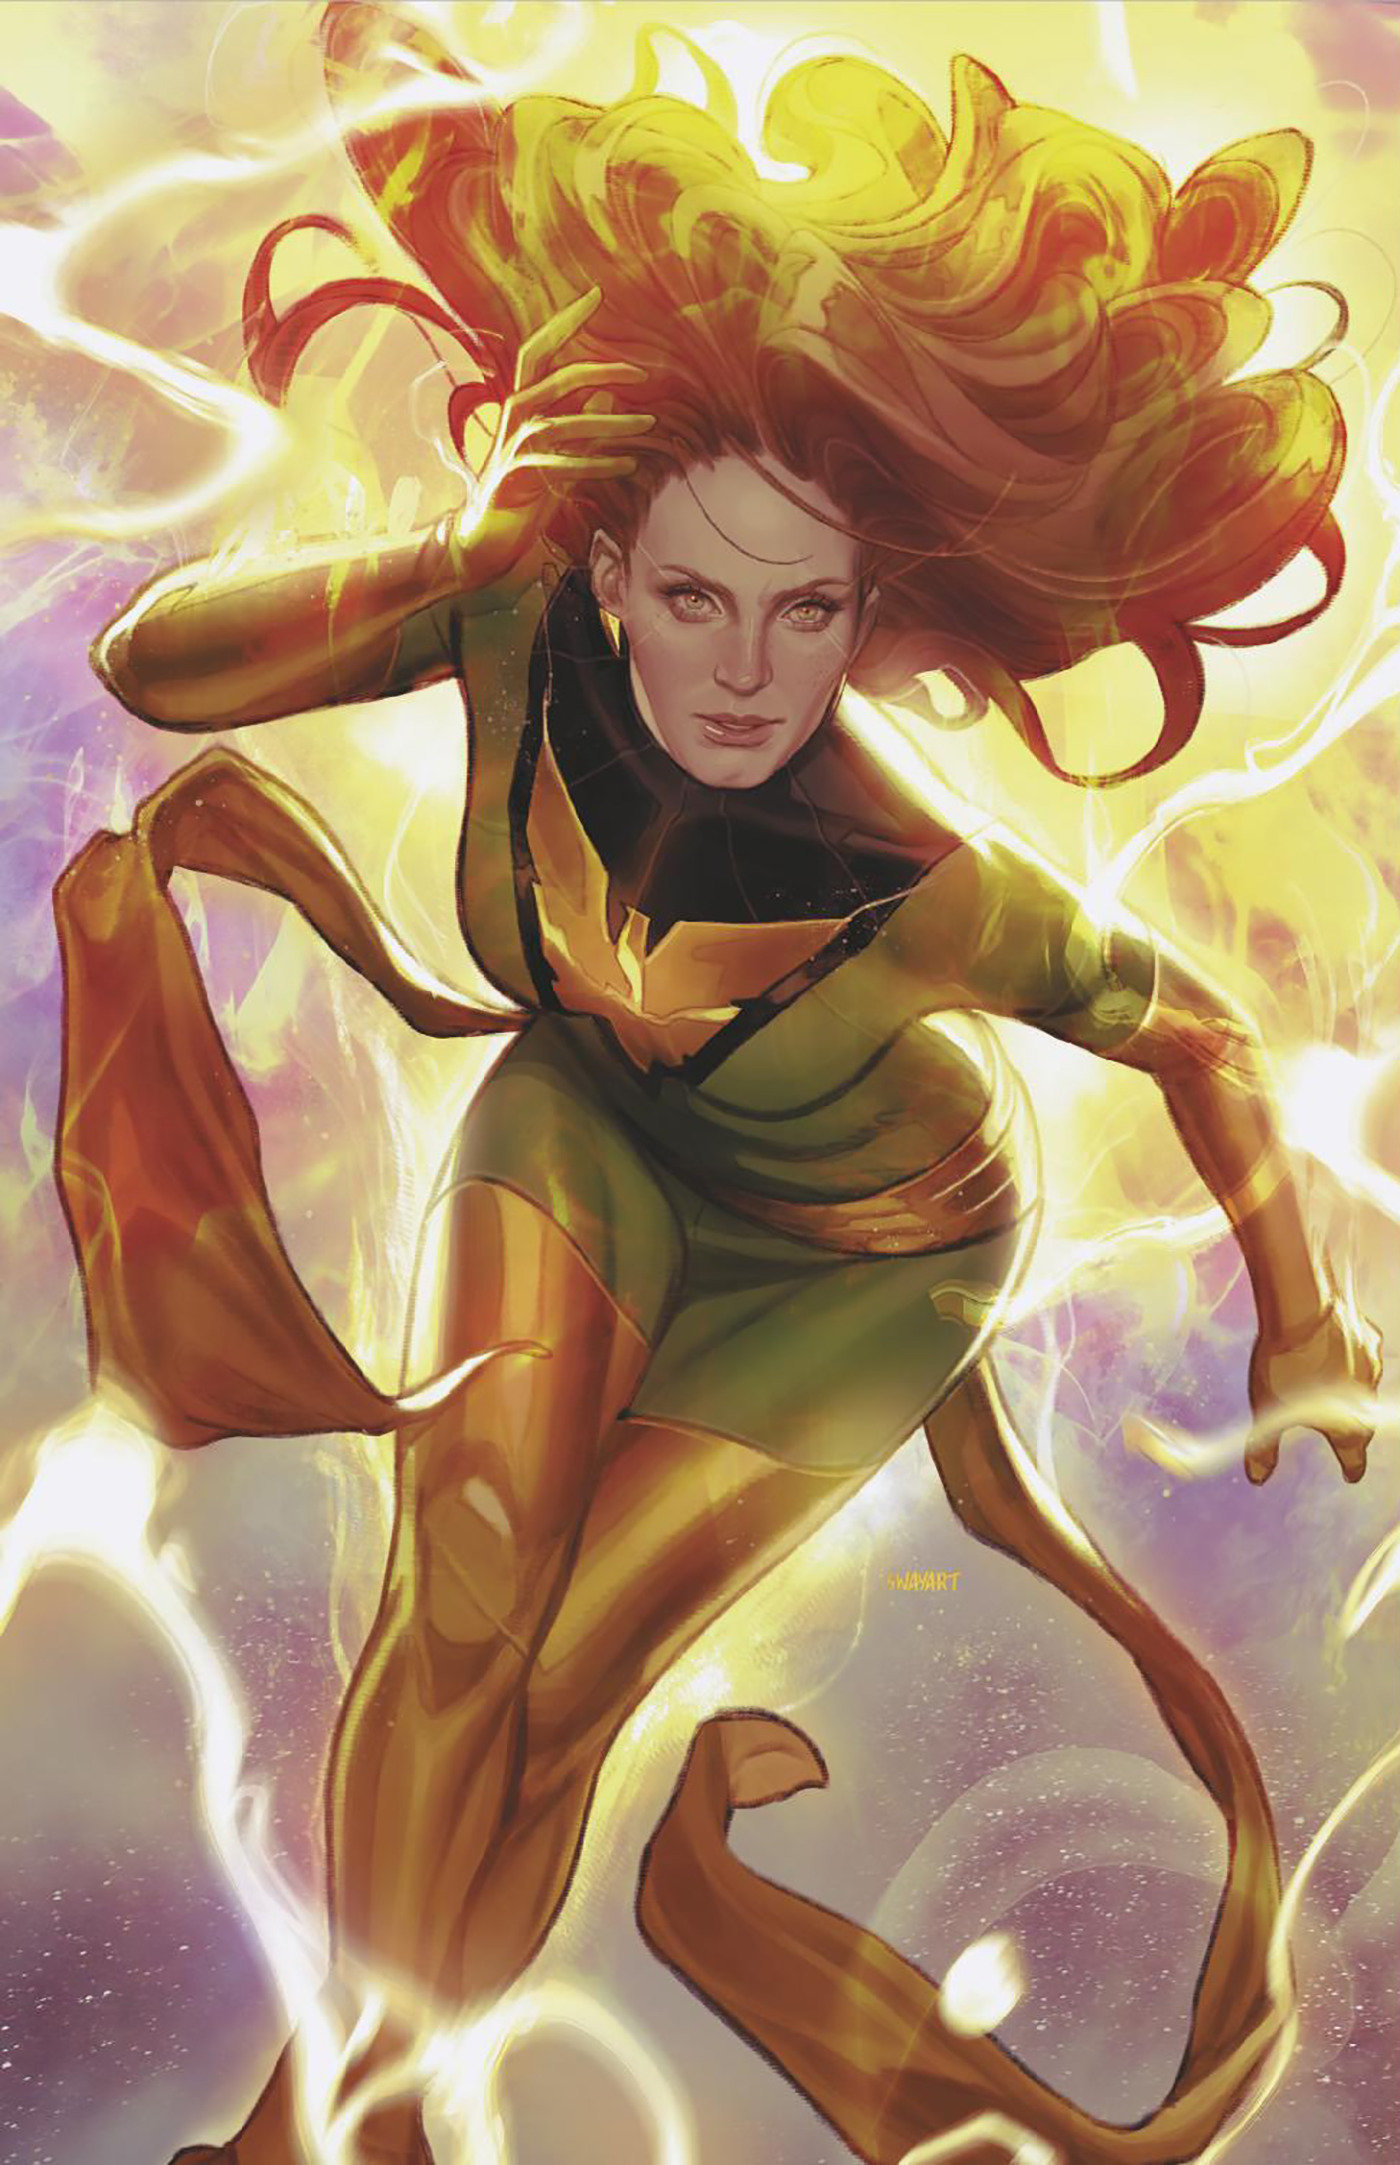 Rise of the Powers of X #5 1 for 50 Incentive Swaby Jean Grey Virgin Variant (Fall of the House of X)